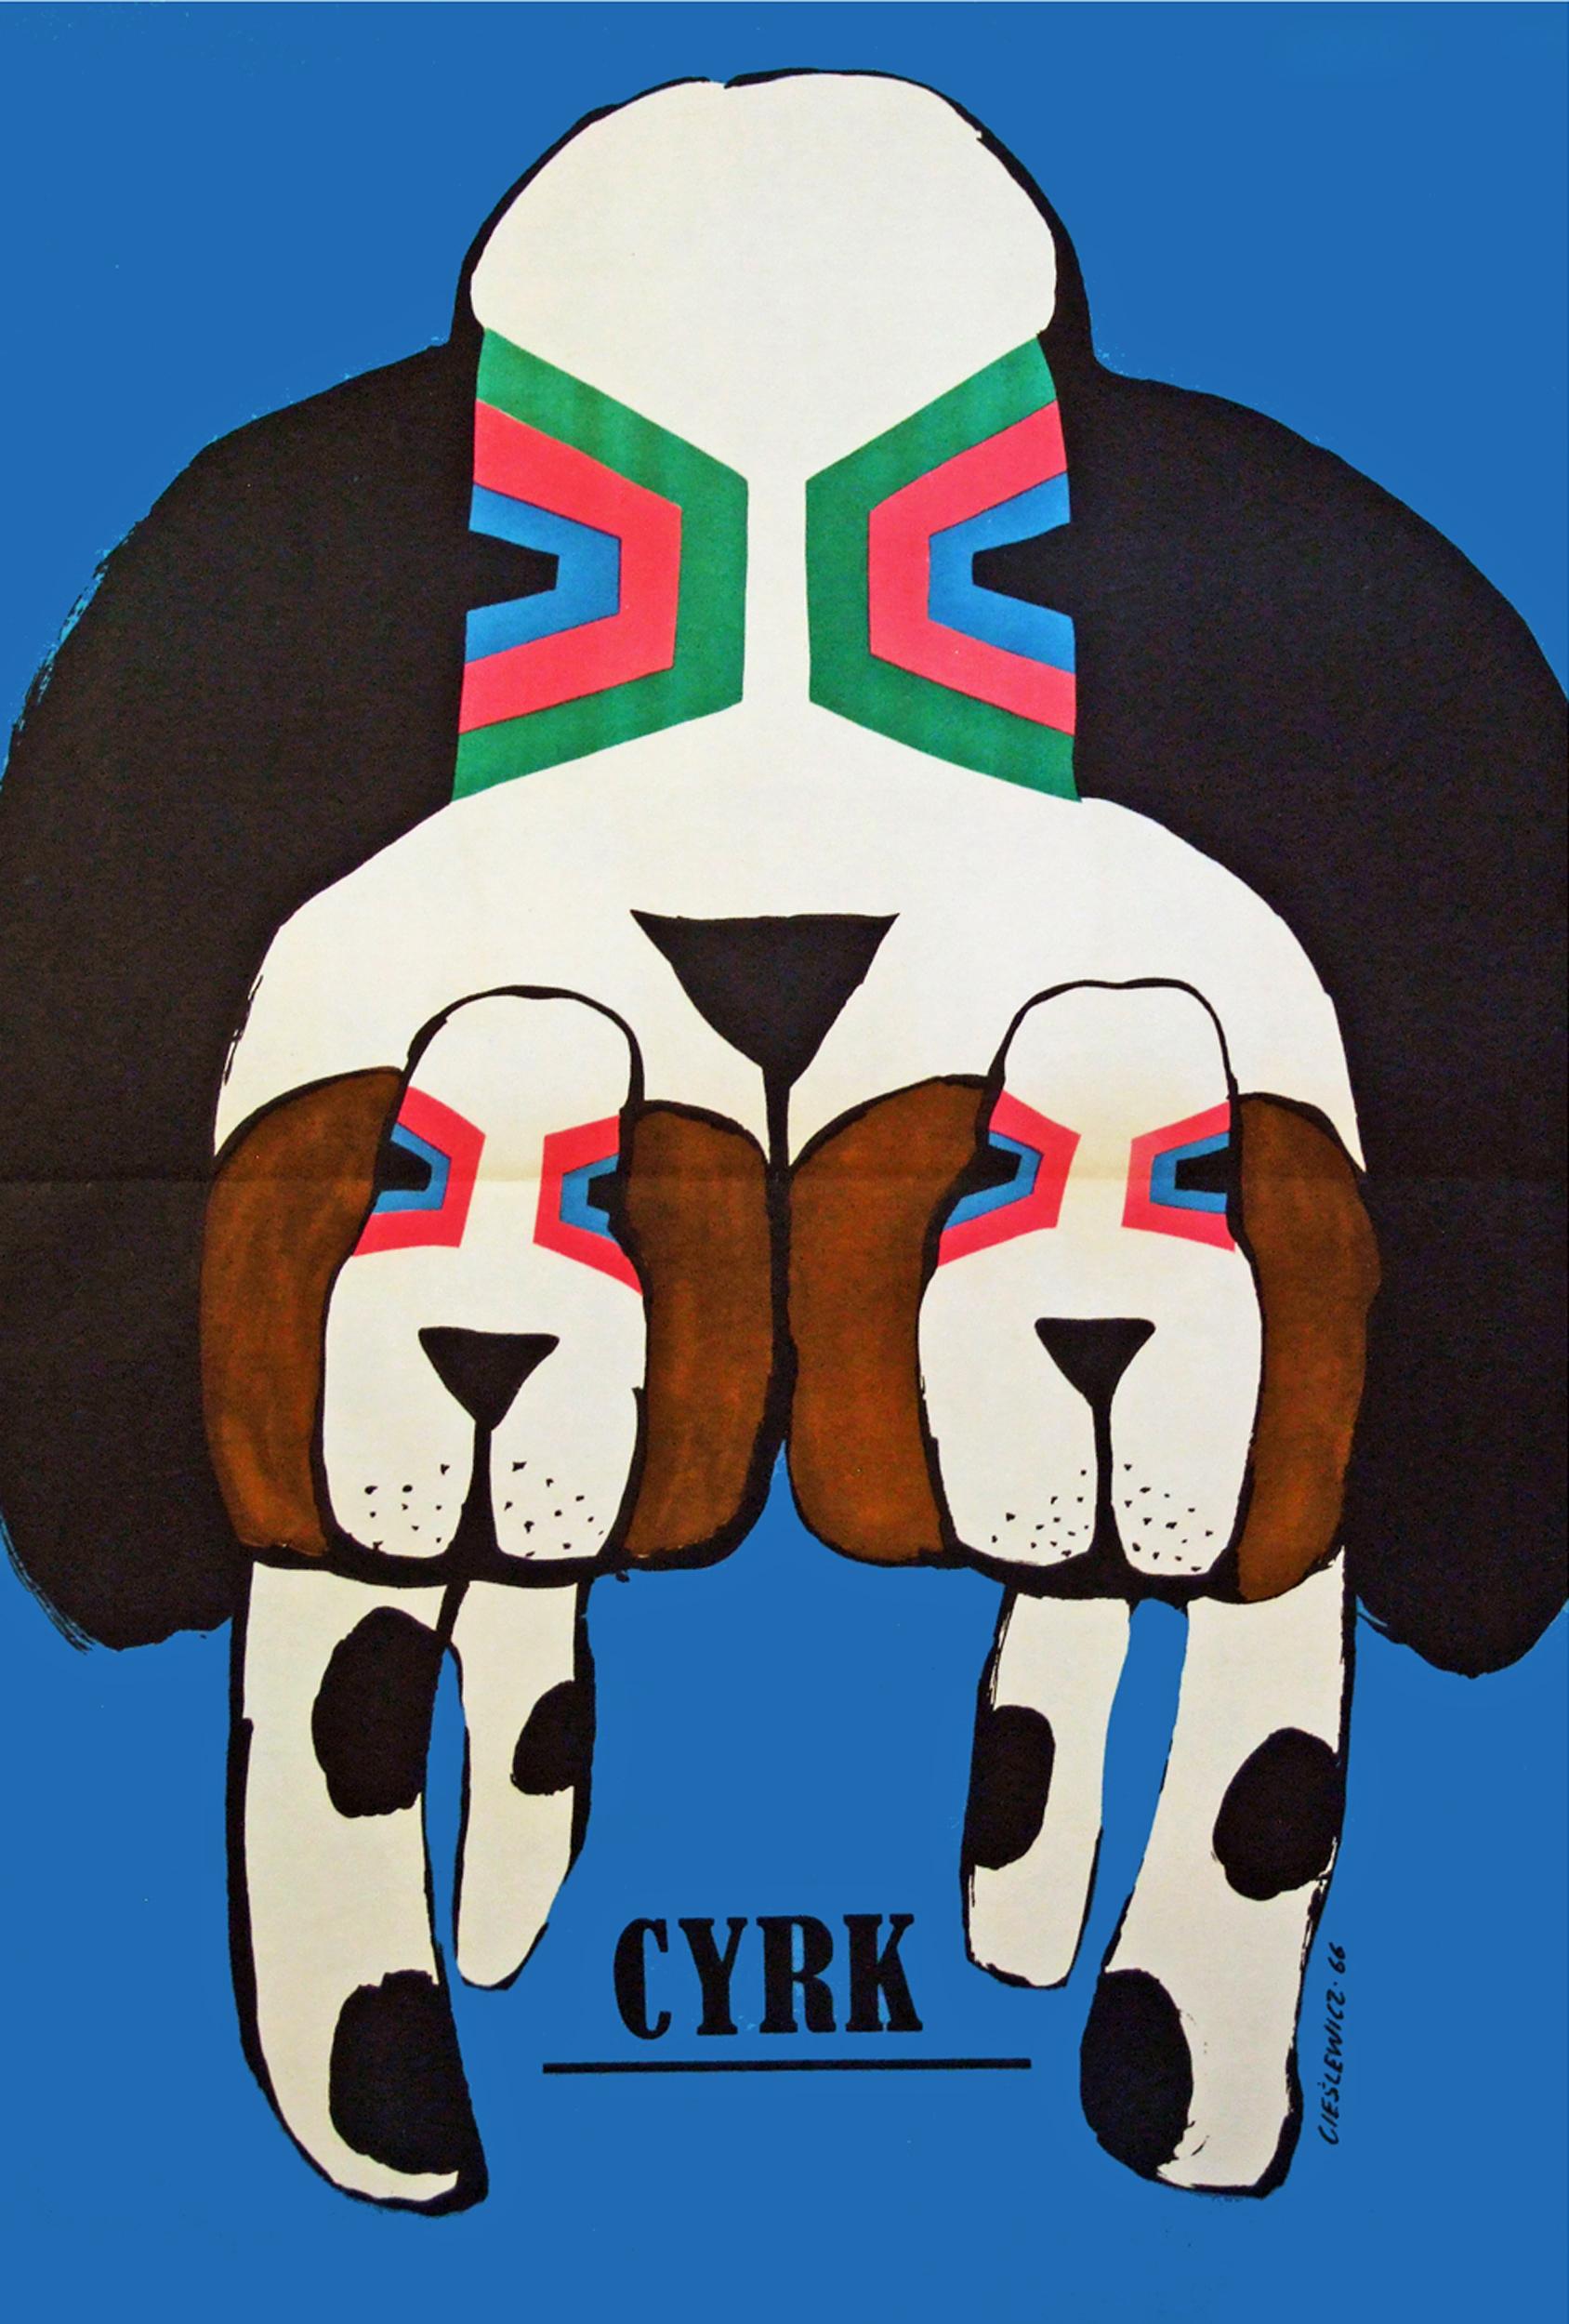 Original 1966 Polish circus promotional poster designed by Roman Cieslewicz.

First edition color offset lithograph.

Folded.

Measures: L 97cm x W 67cm.